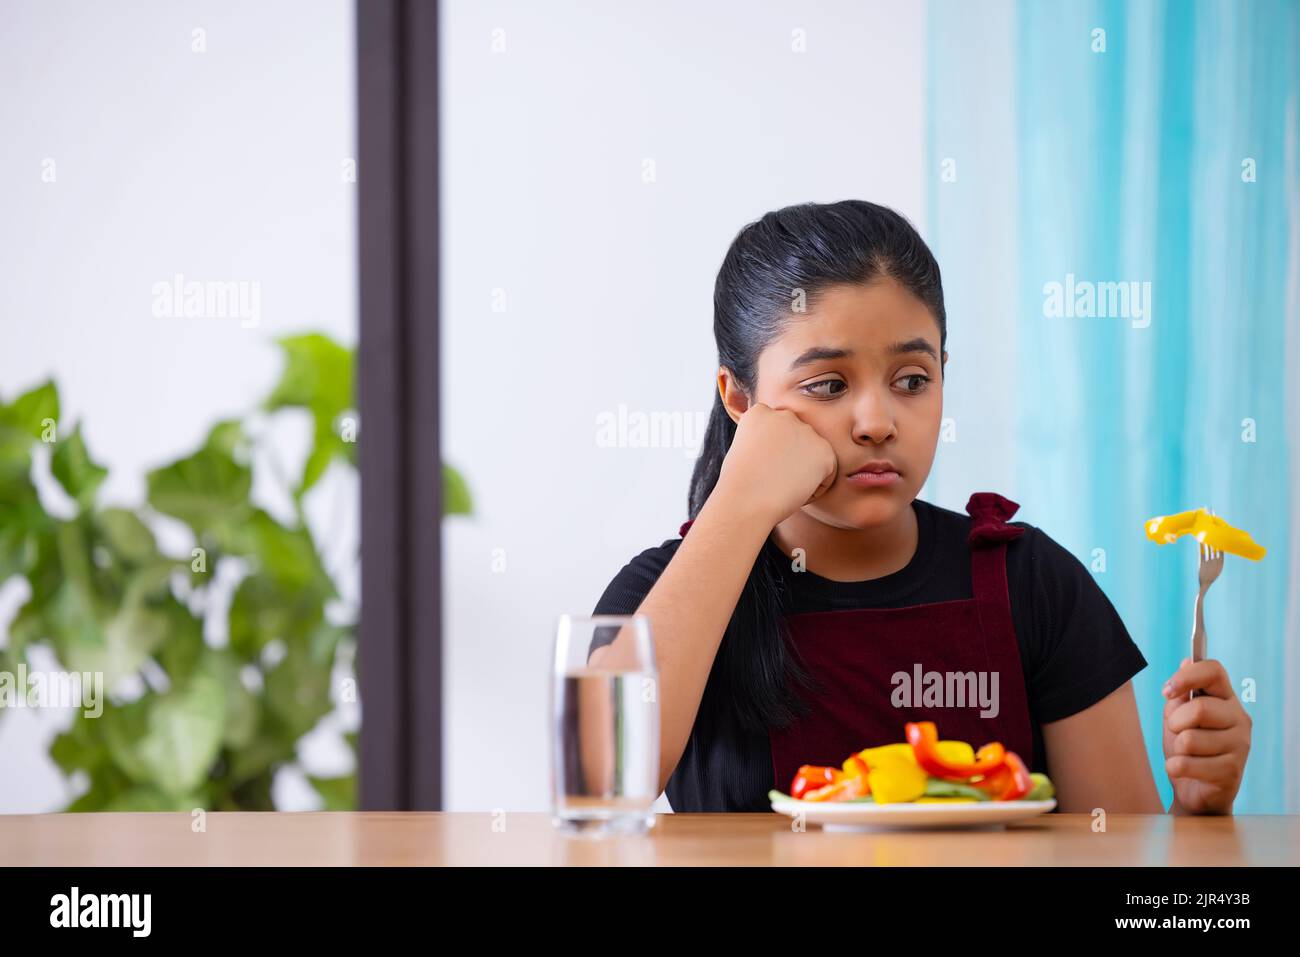 Portrait of a little girl expressing unhappiness over a plate of vegetable salad Stock Photo